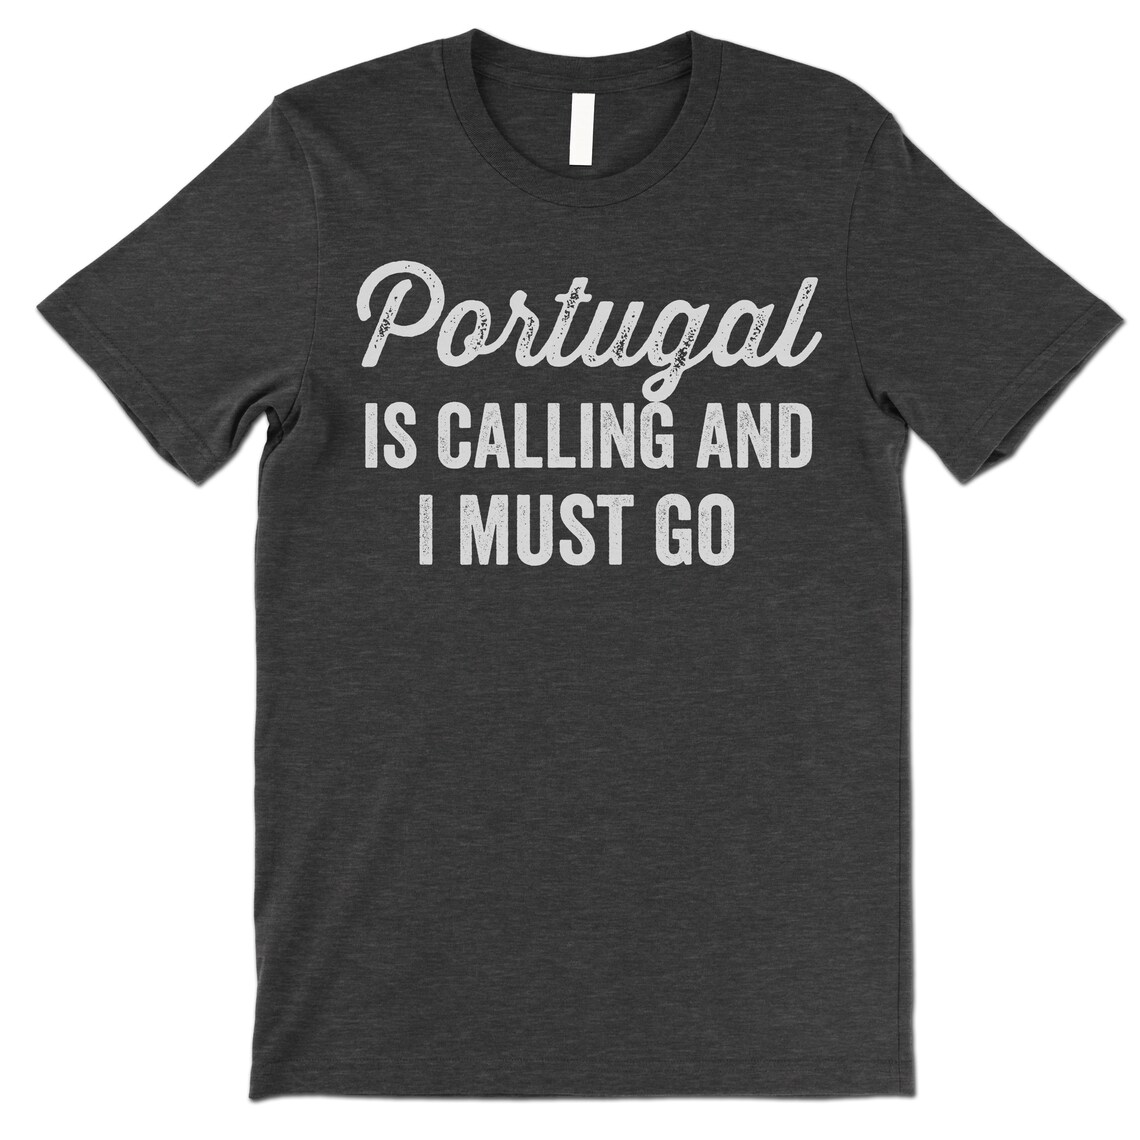 Portugal is Calling T Shirt. Funny Portugal Gift. | Etsy